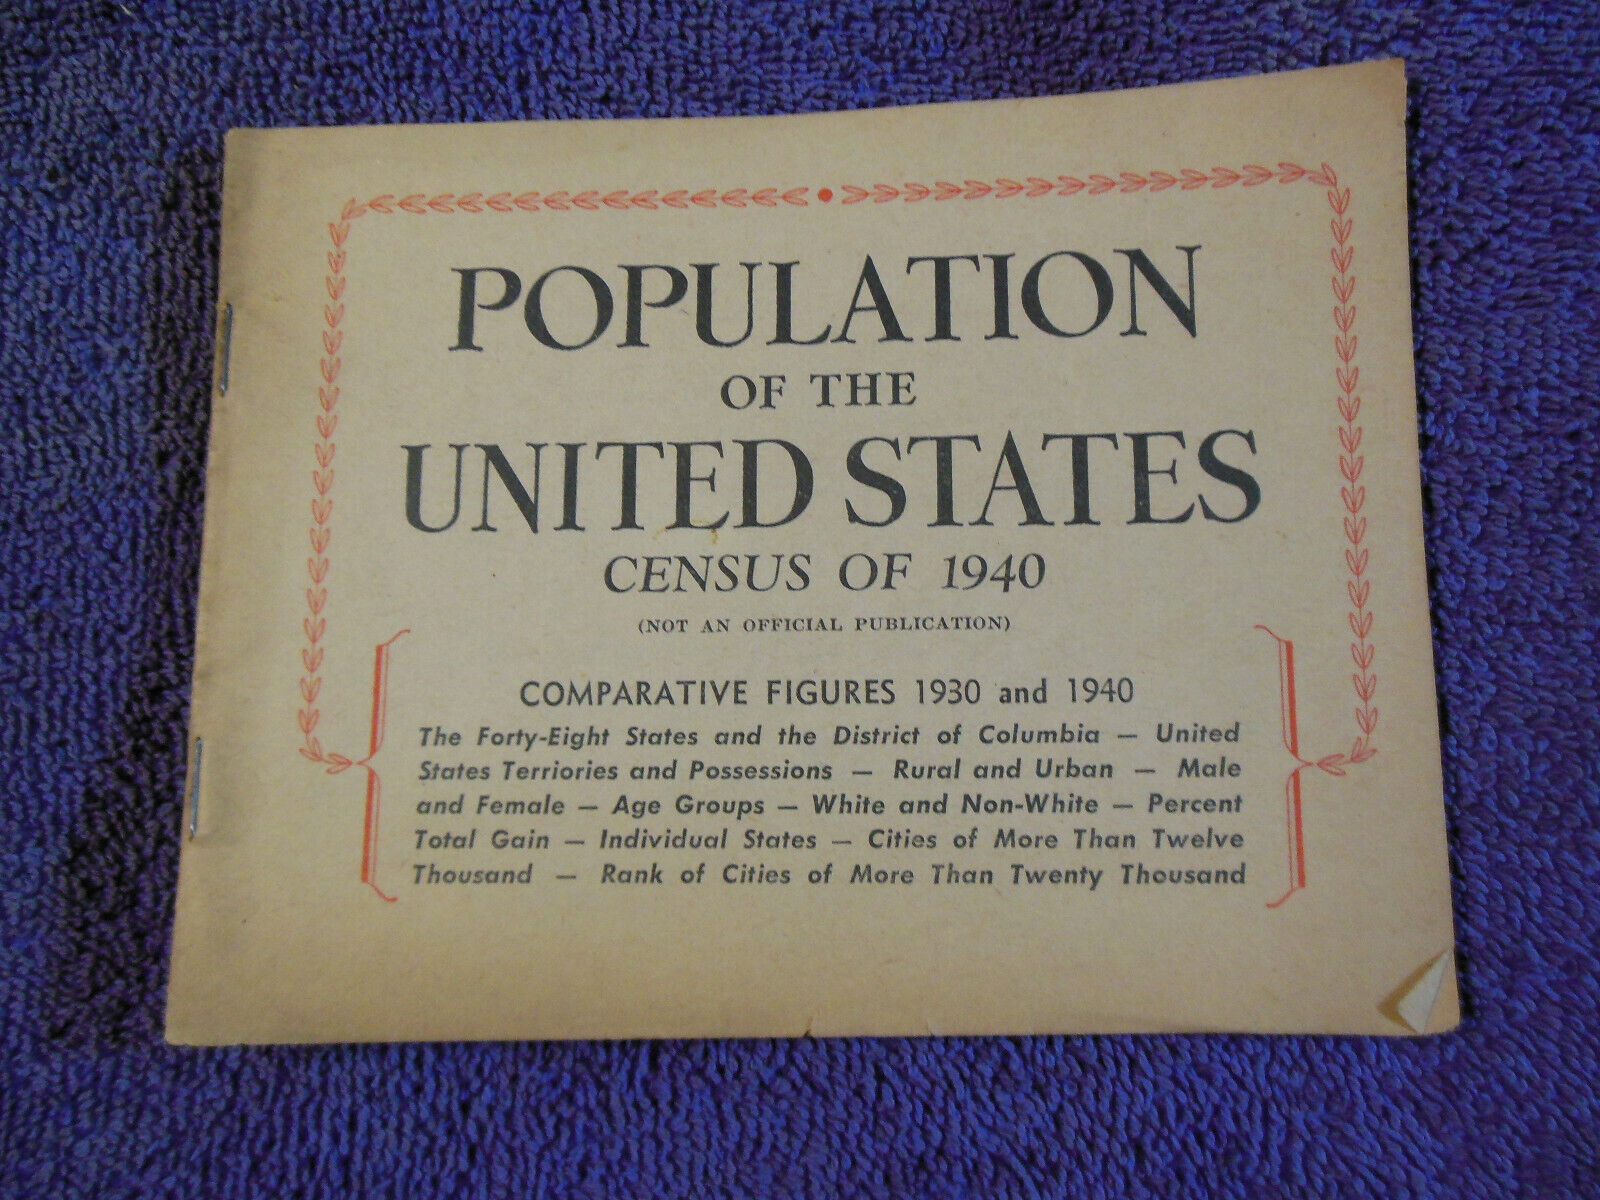 POPULATION OF THE UNITED STATES CENSUS OF 1940,NOT OFFICIAL-WITH DR. MILES ADS